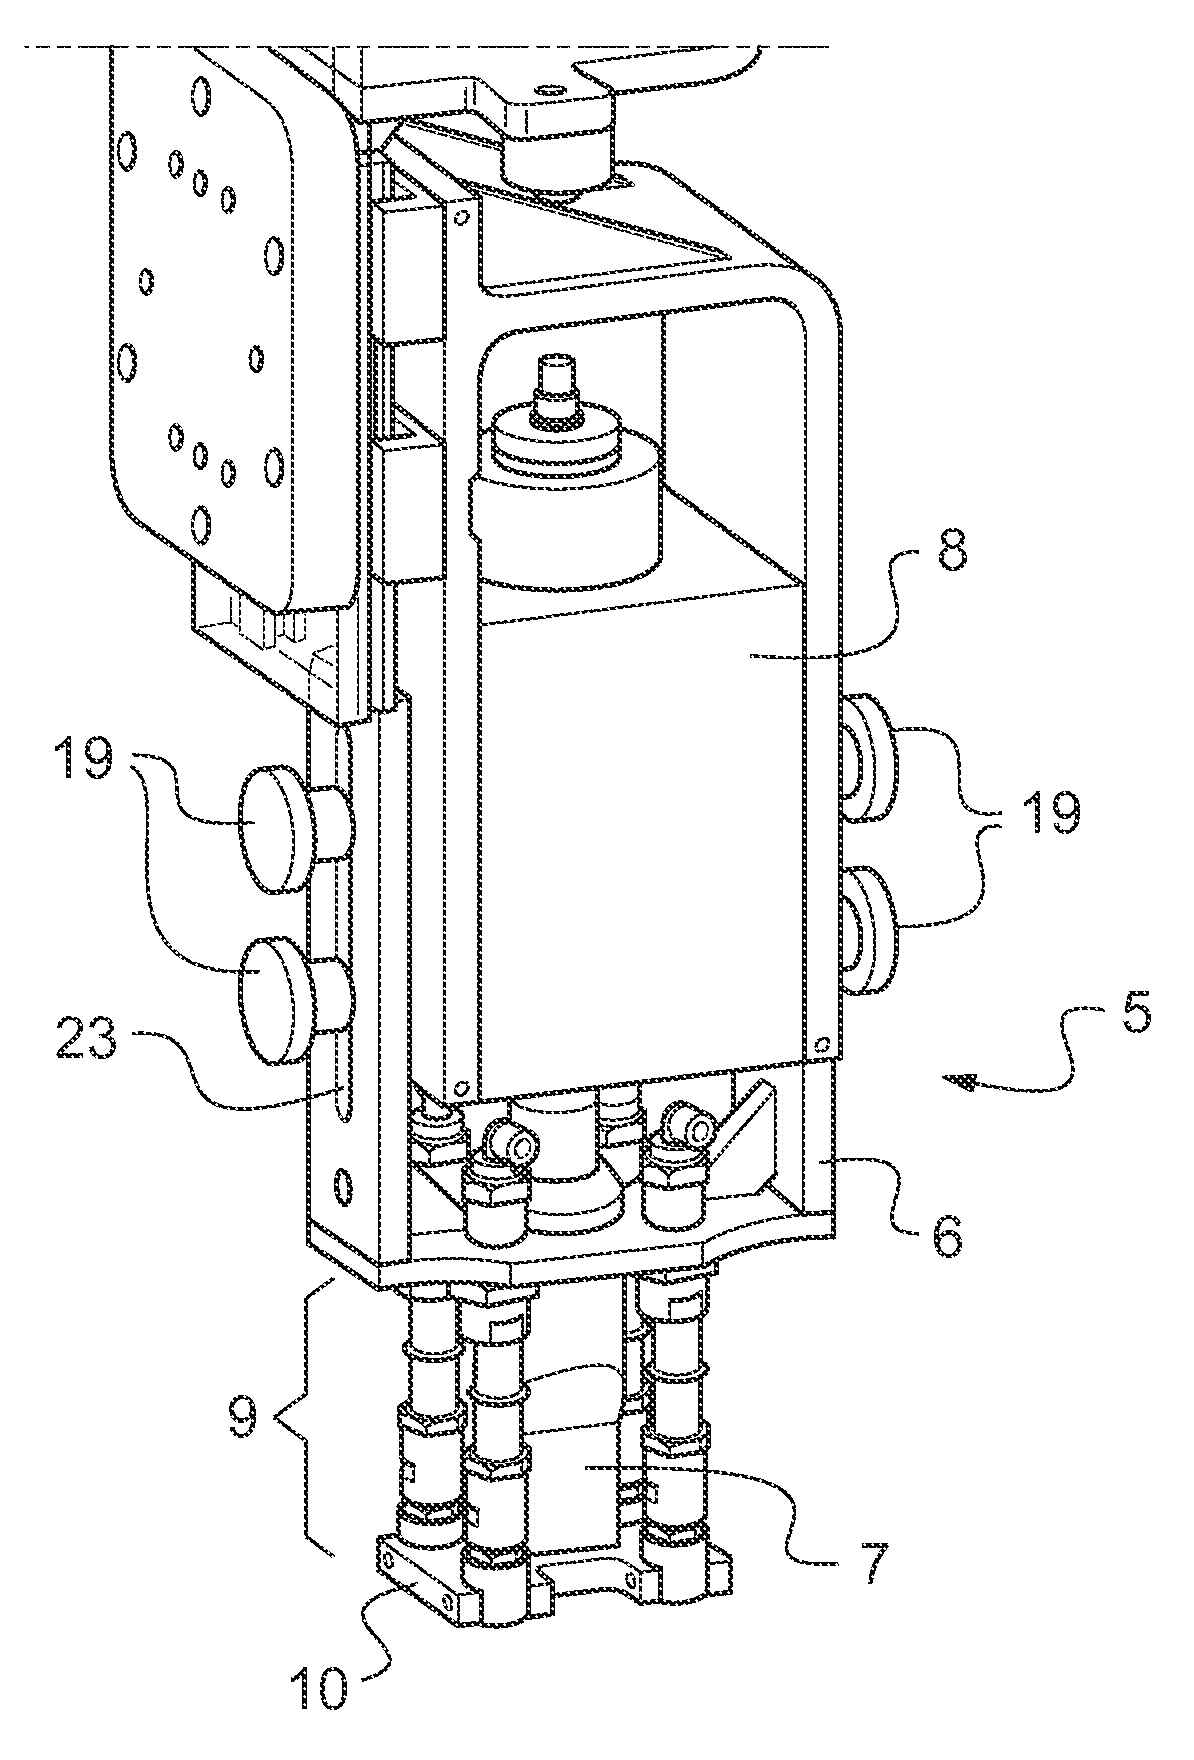 Ultrasonic welding device and method of operating said device